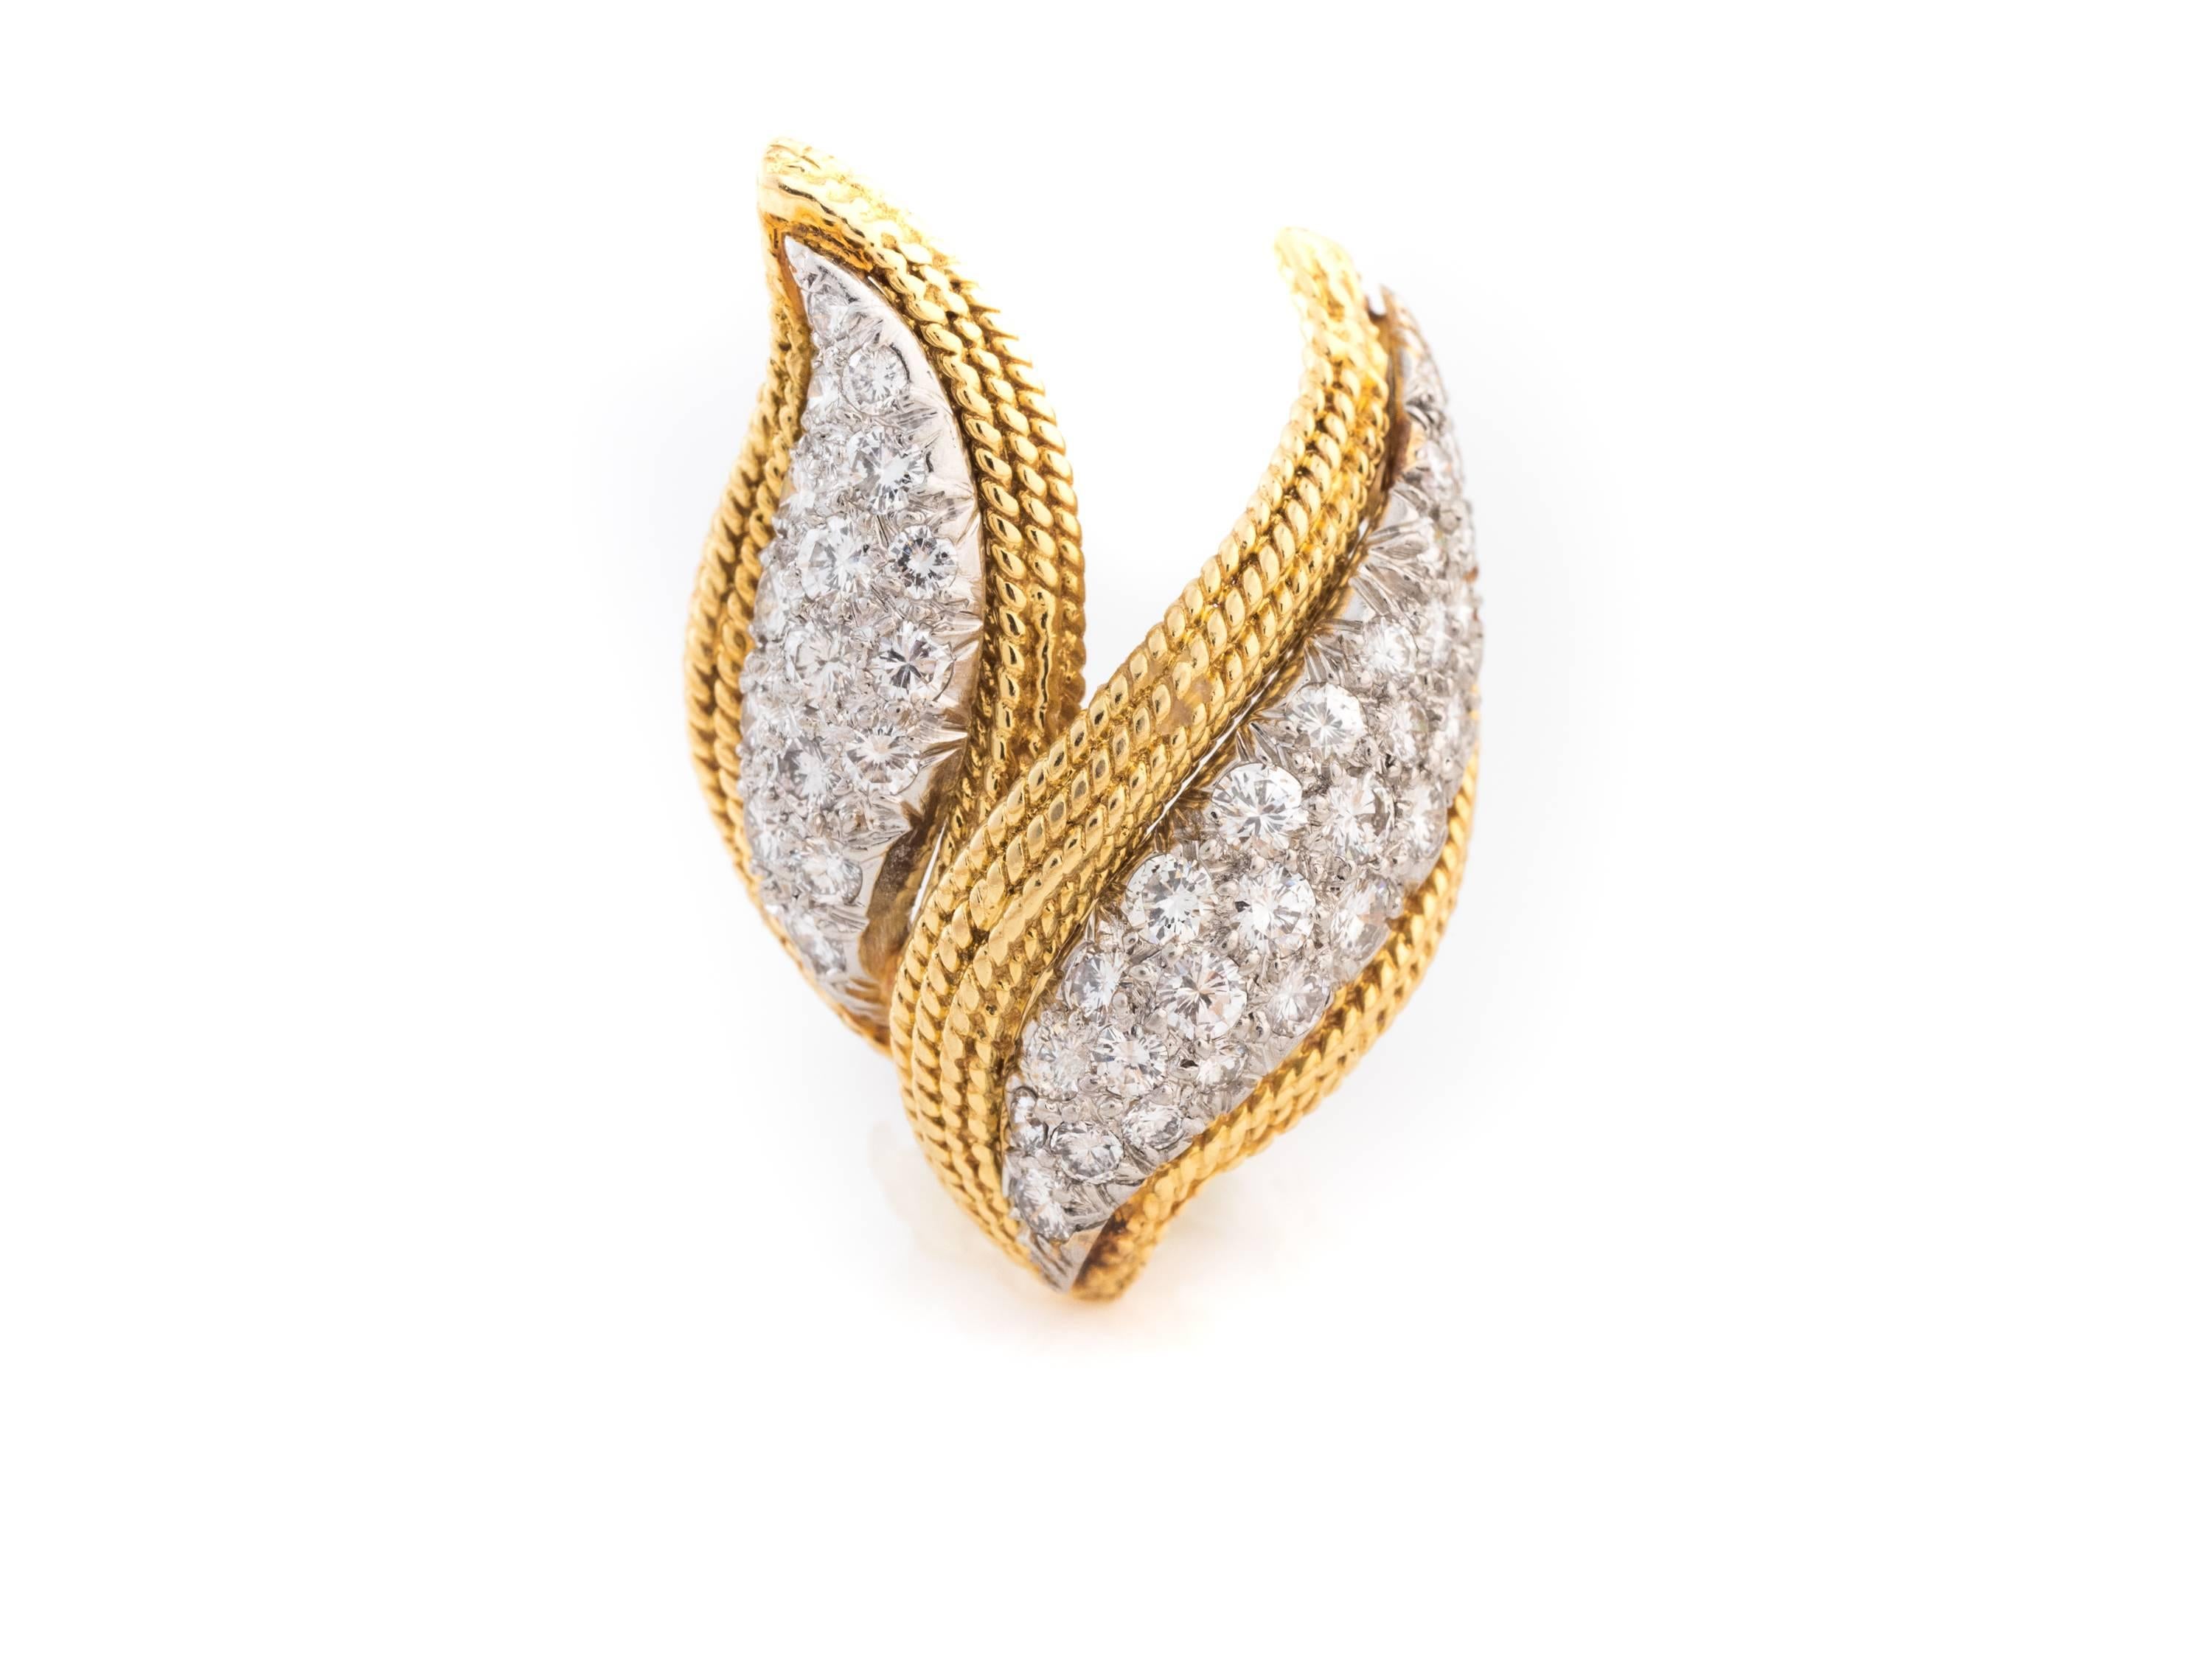 Double-Leaf motif diamond & 18kt yellow gold earrings. These Earrings have white gold centers where all the diamonds are set. Total diamond weight is 3.80 carats, and all diamonds boast G color and VS clarity. The outer yellow gold edge has an